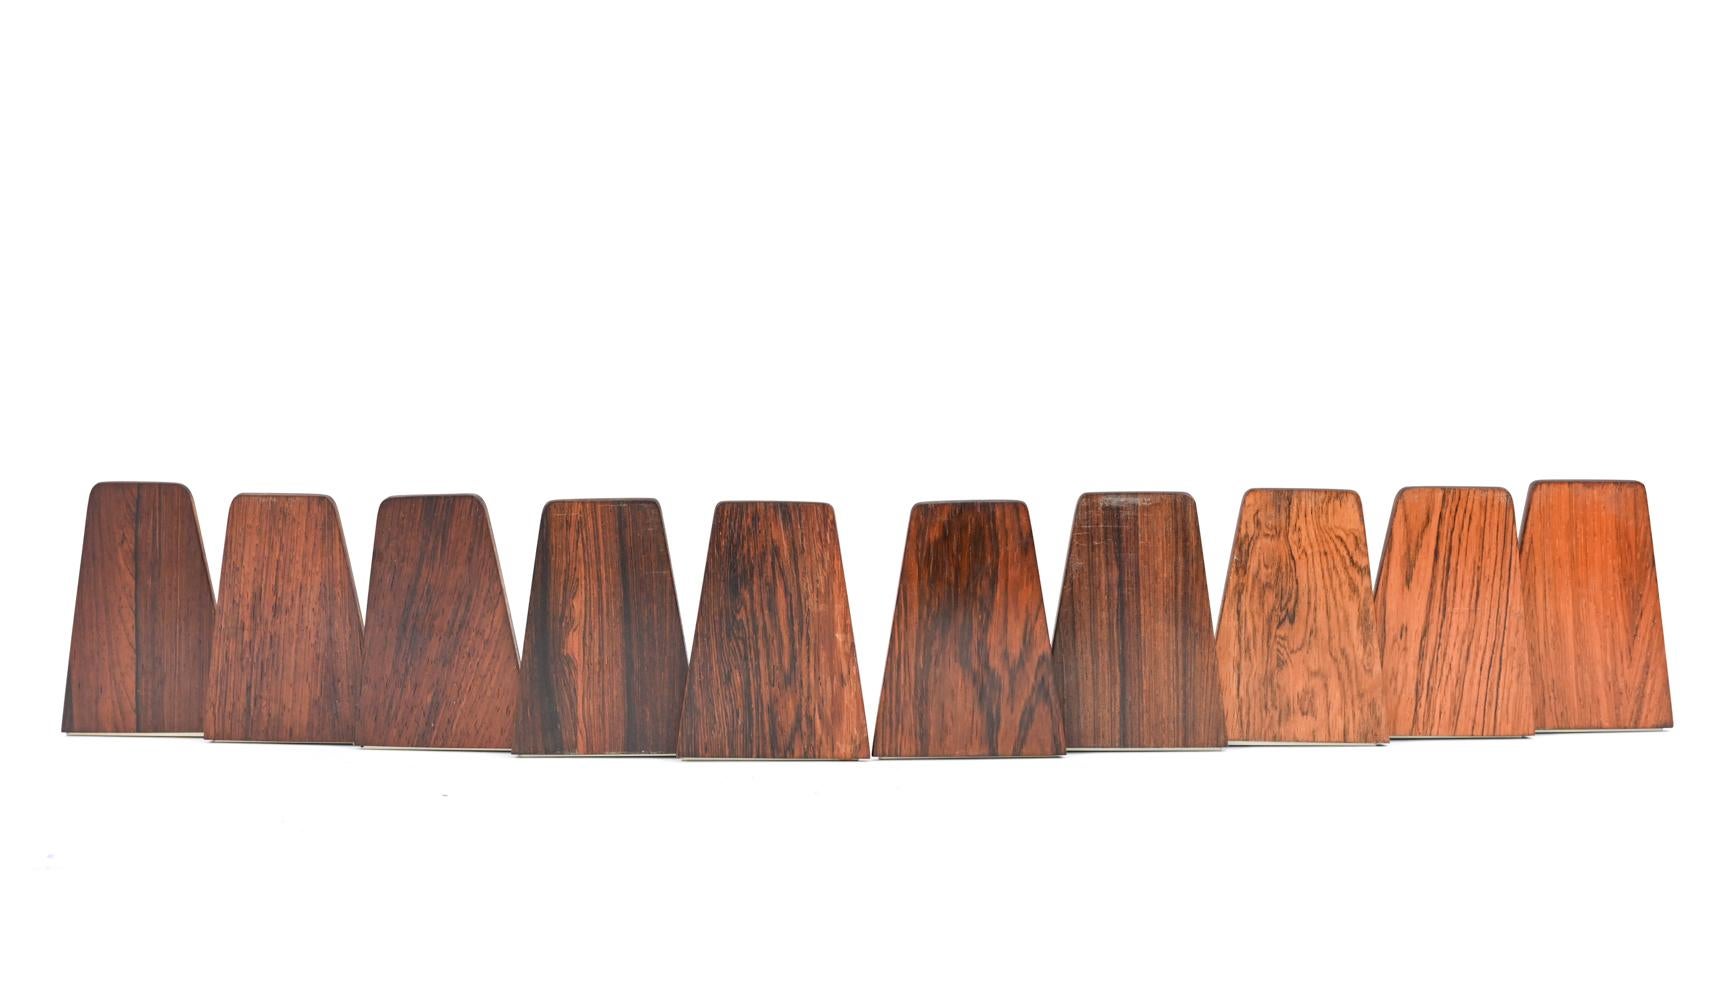 A pair of Danish midcentury rosewood bookends by the esteemed designer Kai Kristiansen. These bookends are a wonderful accessory to bring in a Scandinavian modern element. Multiple pairs available.